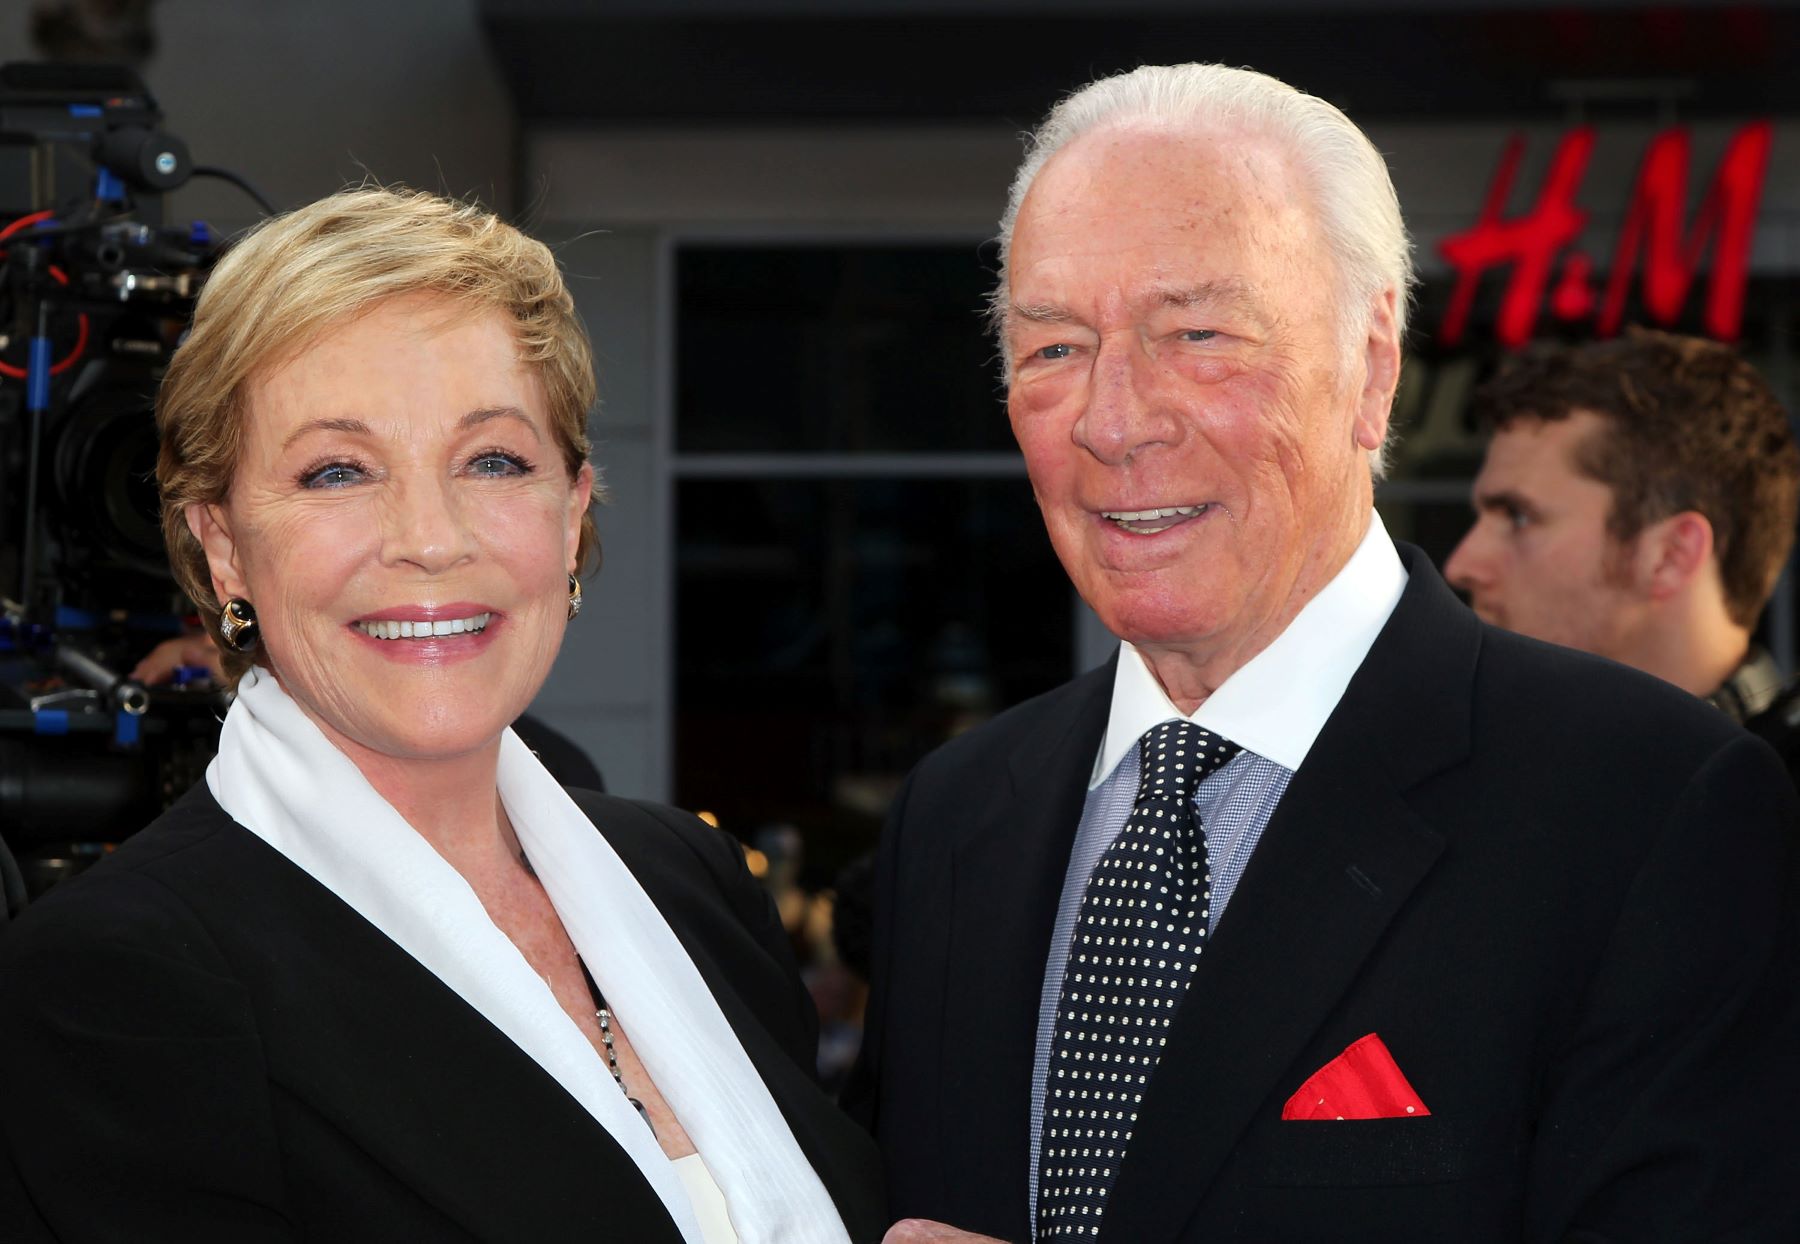 Julie Andrews and Christopher Plummer attending the 2015 TCM Classic Film Festival in Hollywood, California